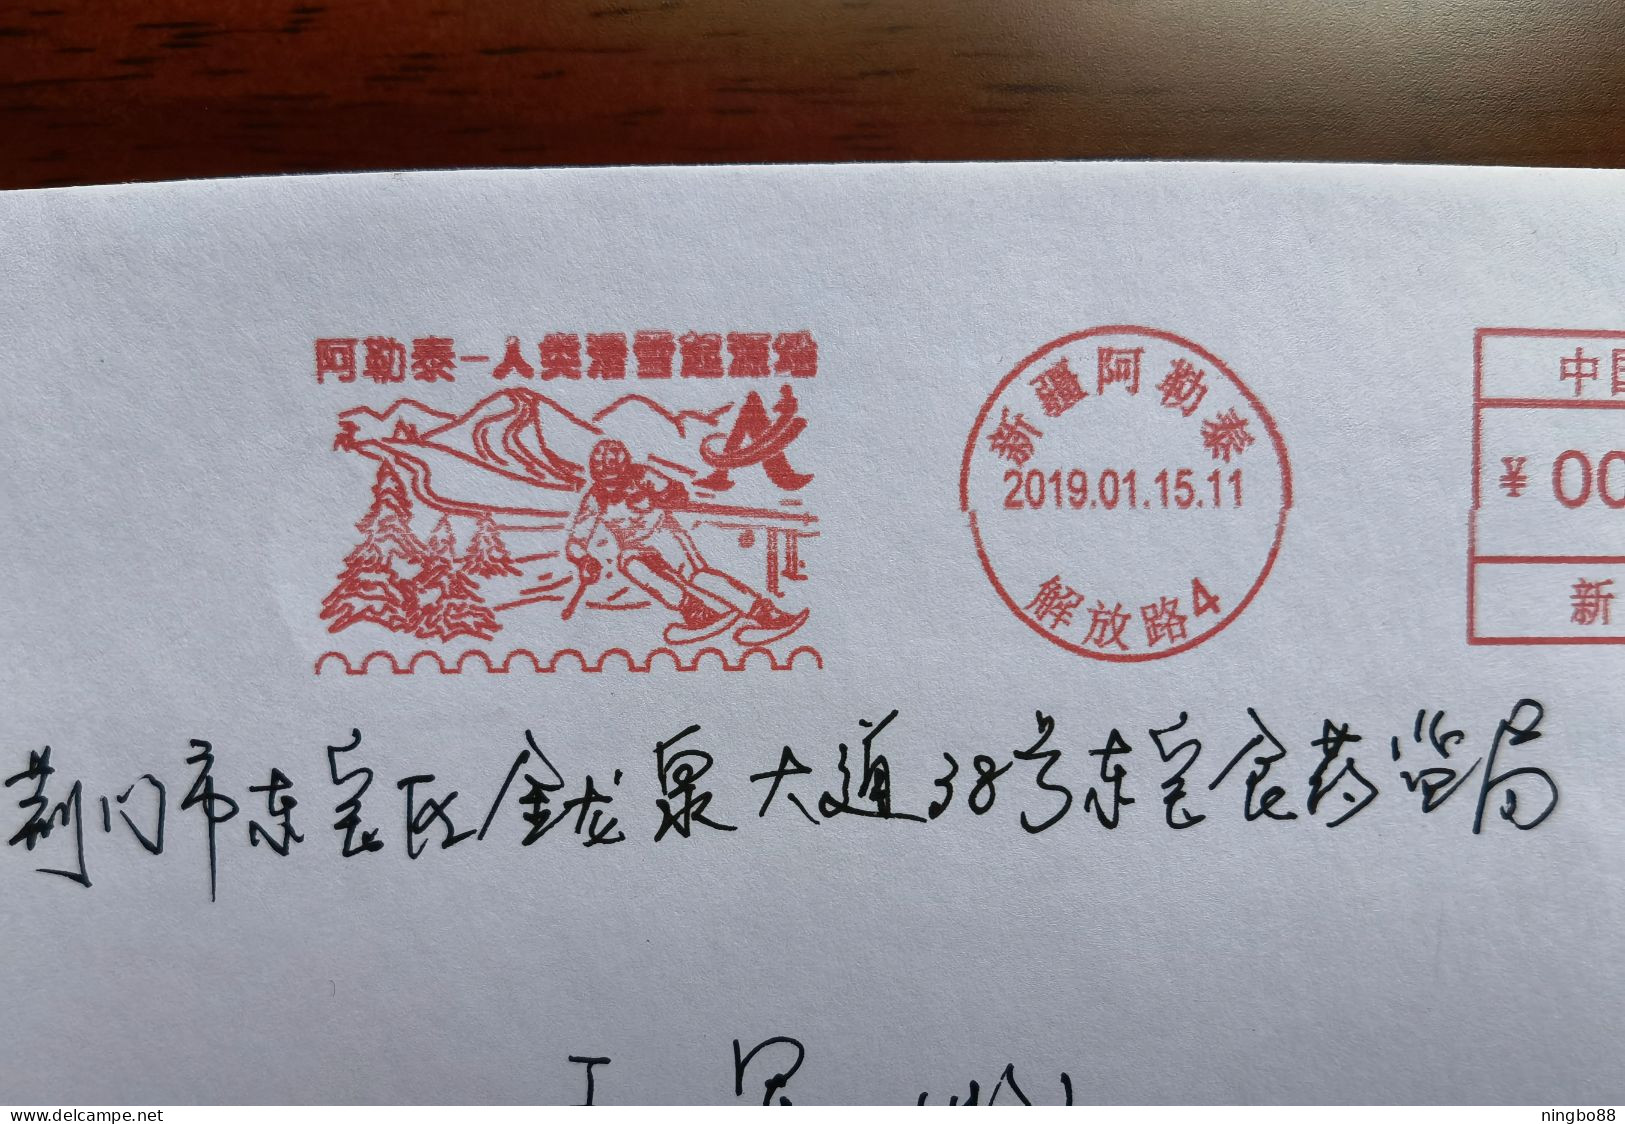 Skiing Player,CN 19 Altay Post Altay-The Origin Of Human Skiing Meter Franking Commemorative PMK 1st Day Used On Cover - Sci